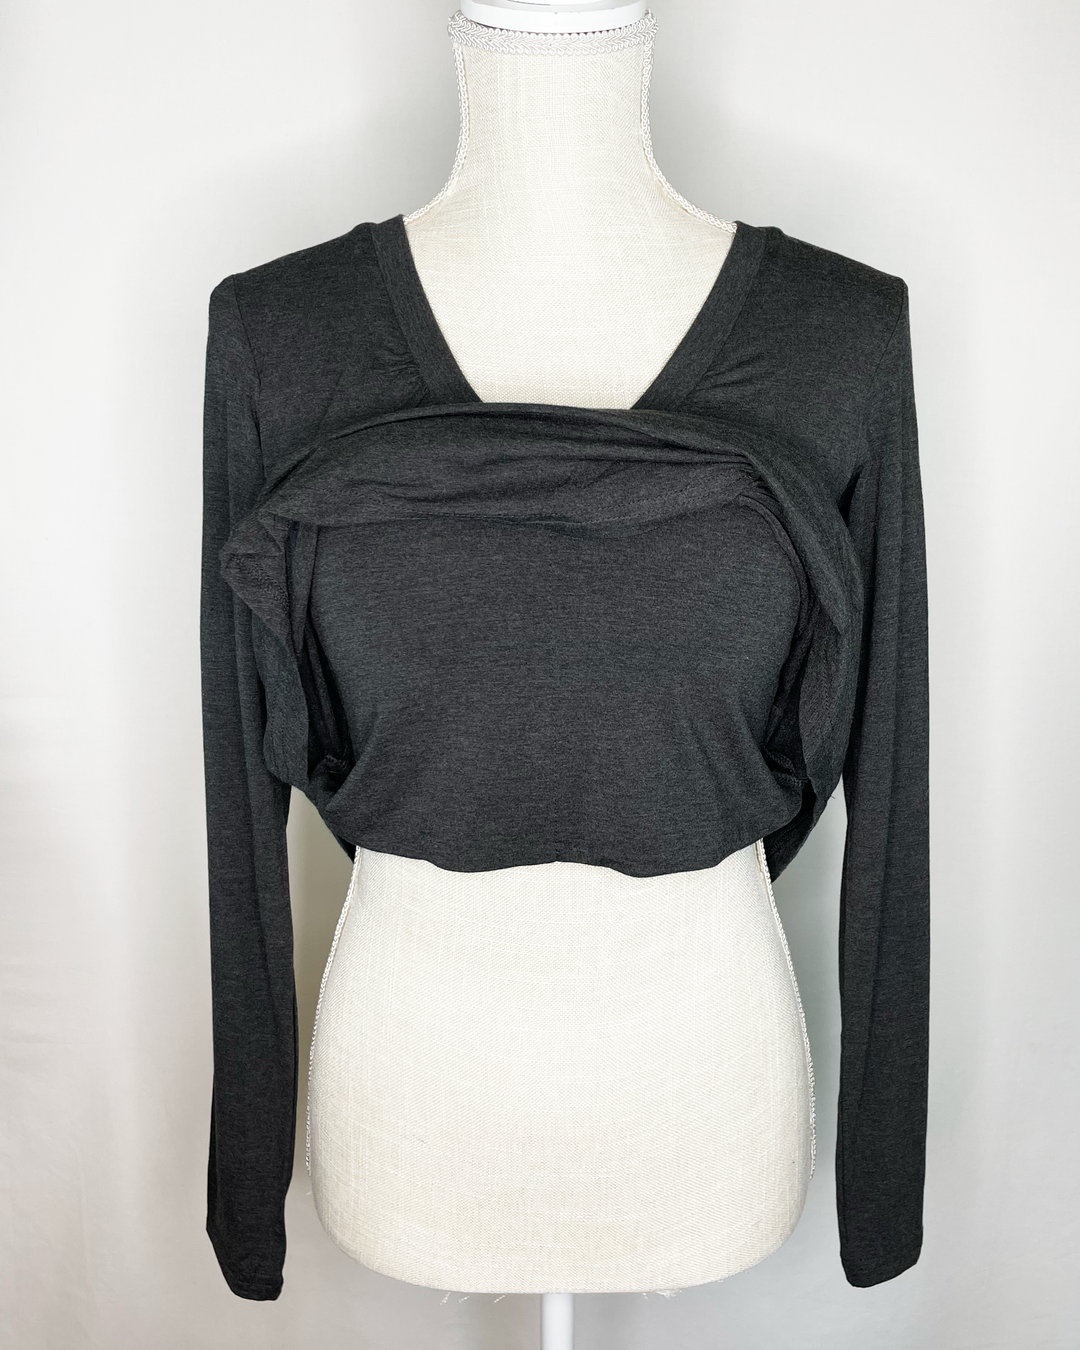 EILEEN V-Pleat Braless Bamboo 3/4 Sleeve Top inner layer view - Charcoal color